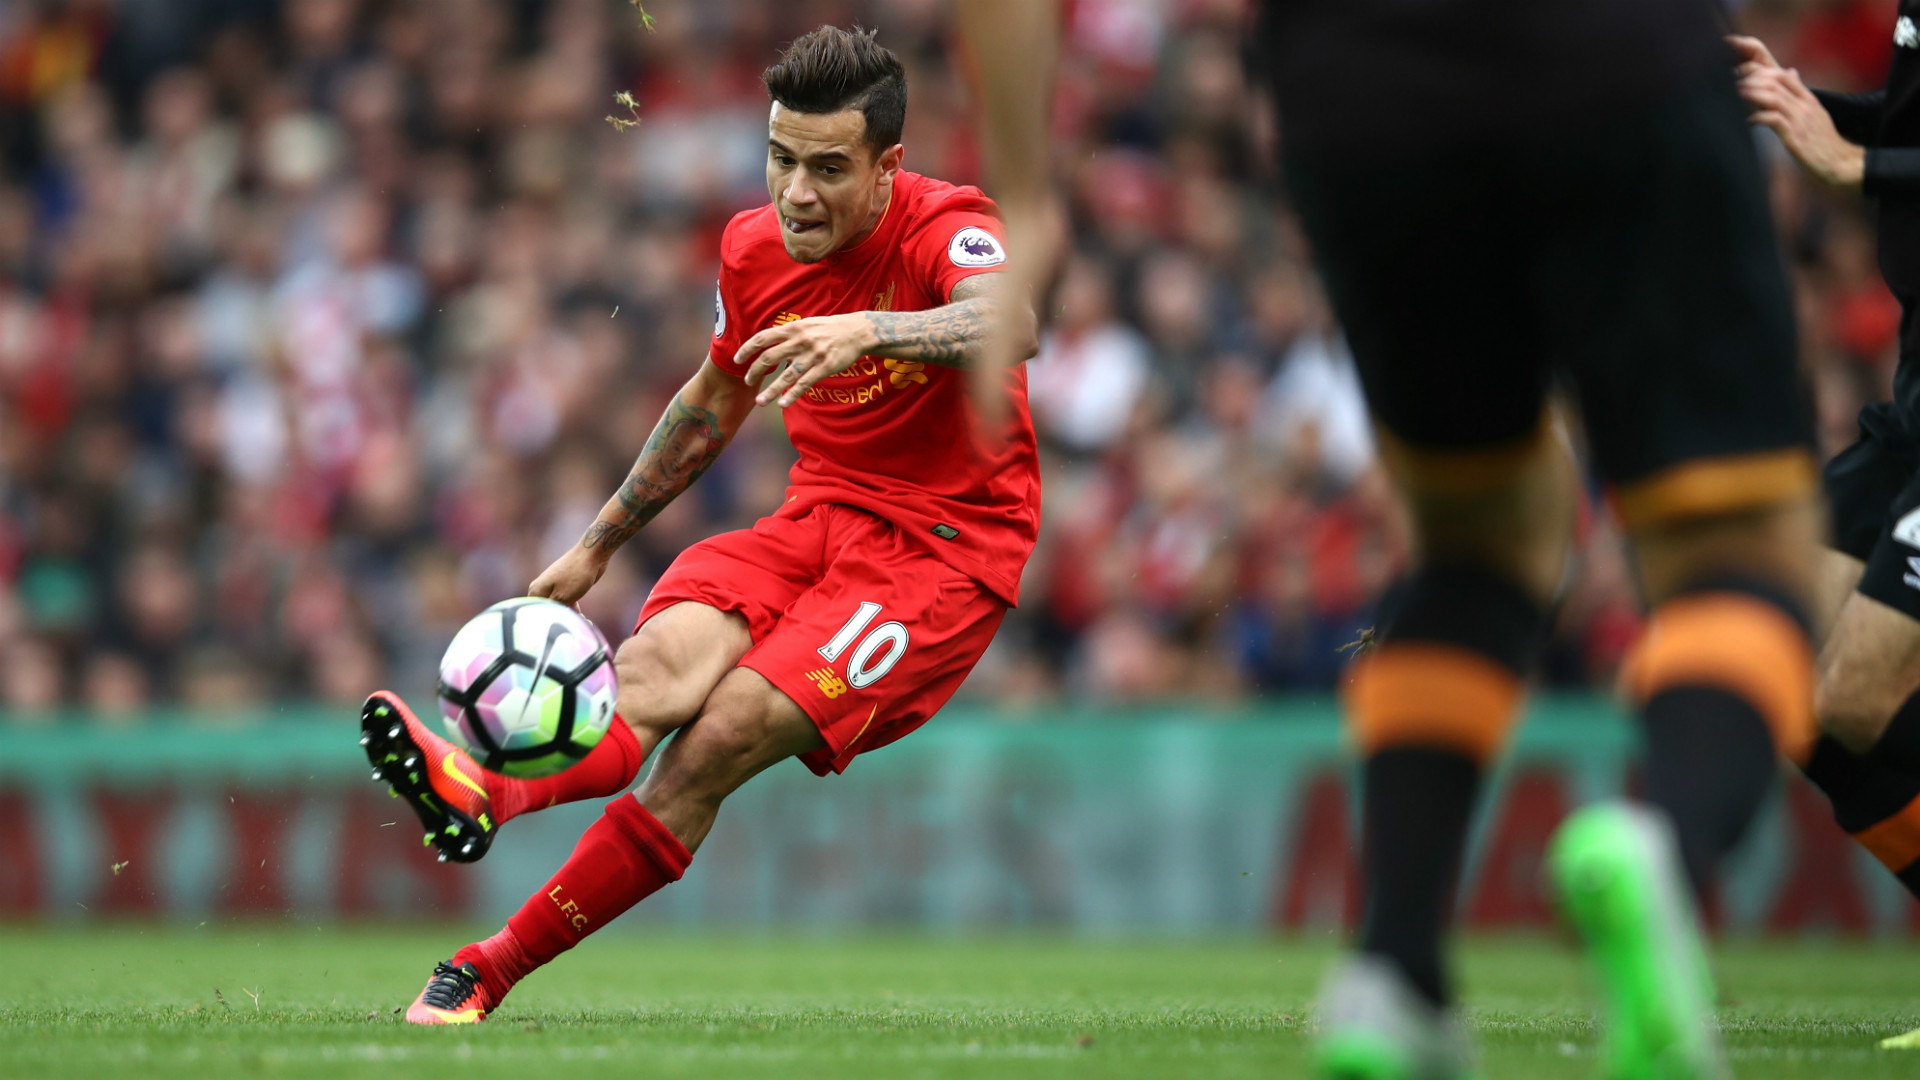 Coutinho Hd Wallpaper Free Download For Desktop Pc - Coutinho Liverpool Free Kick , HD Wallpaper & Backgrounds